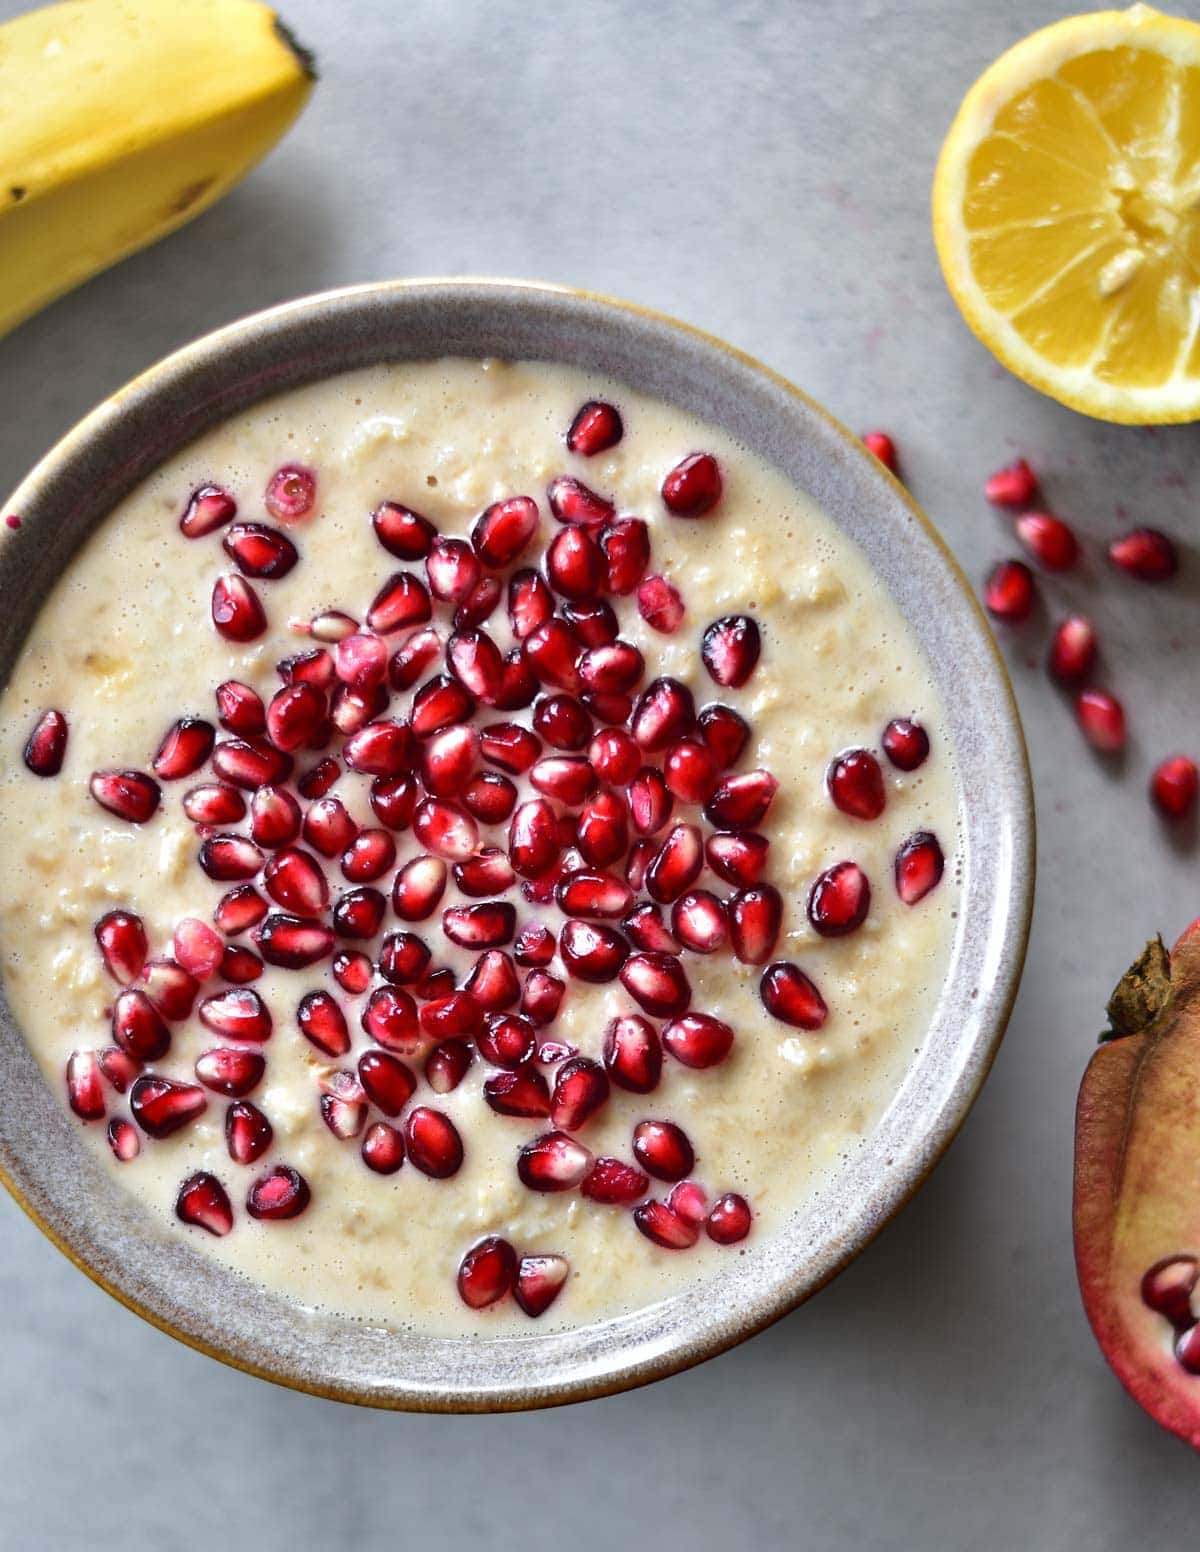 A close up picture of banana peanut butter oatmeal sprinkled with pomegranate seeds on top, in a grey bowl.